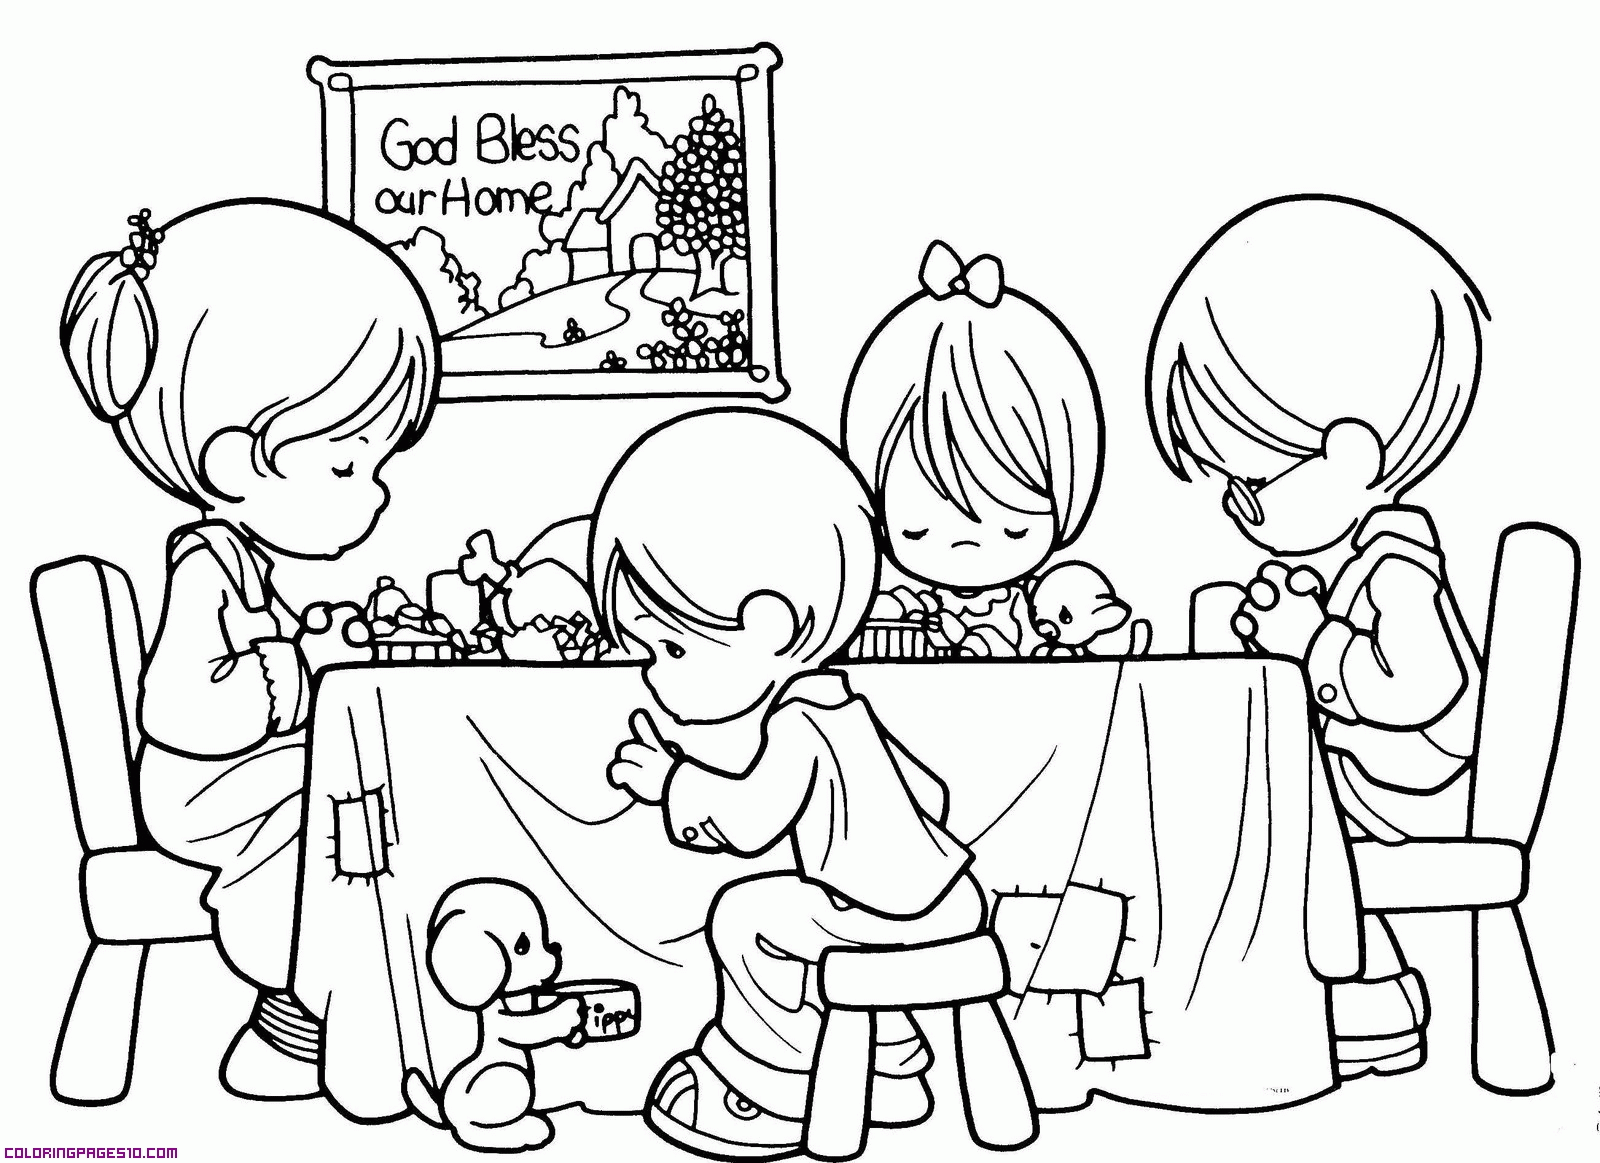 Praying Hands Coloring Page (18 Pictures) - Colorine.net | 1804